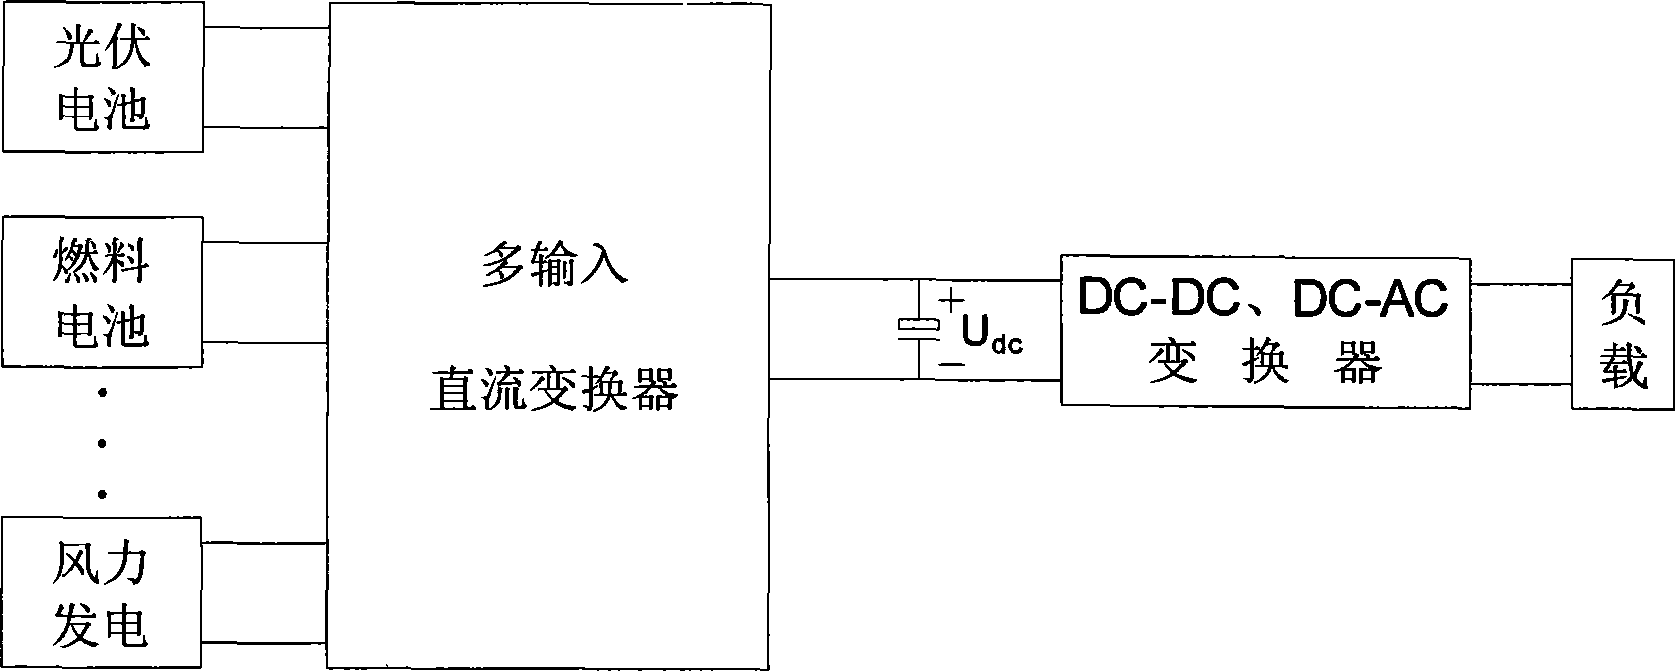 A double-isolation boosting multi-input direct current convertor